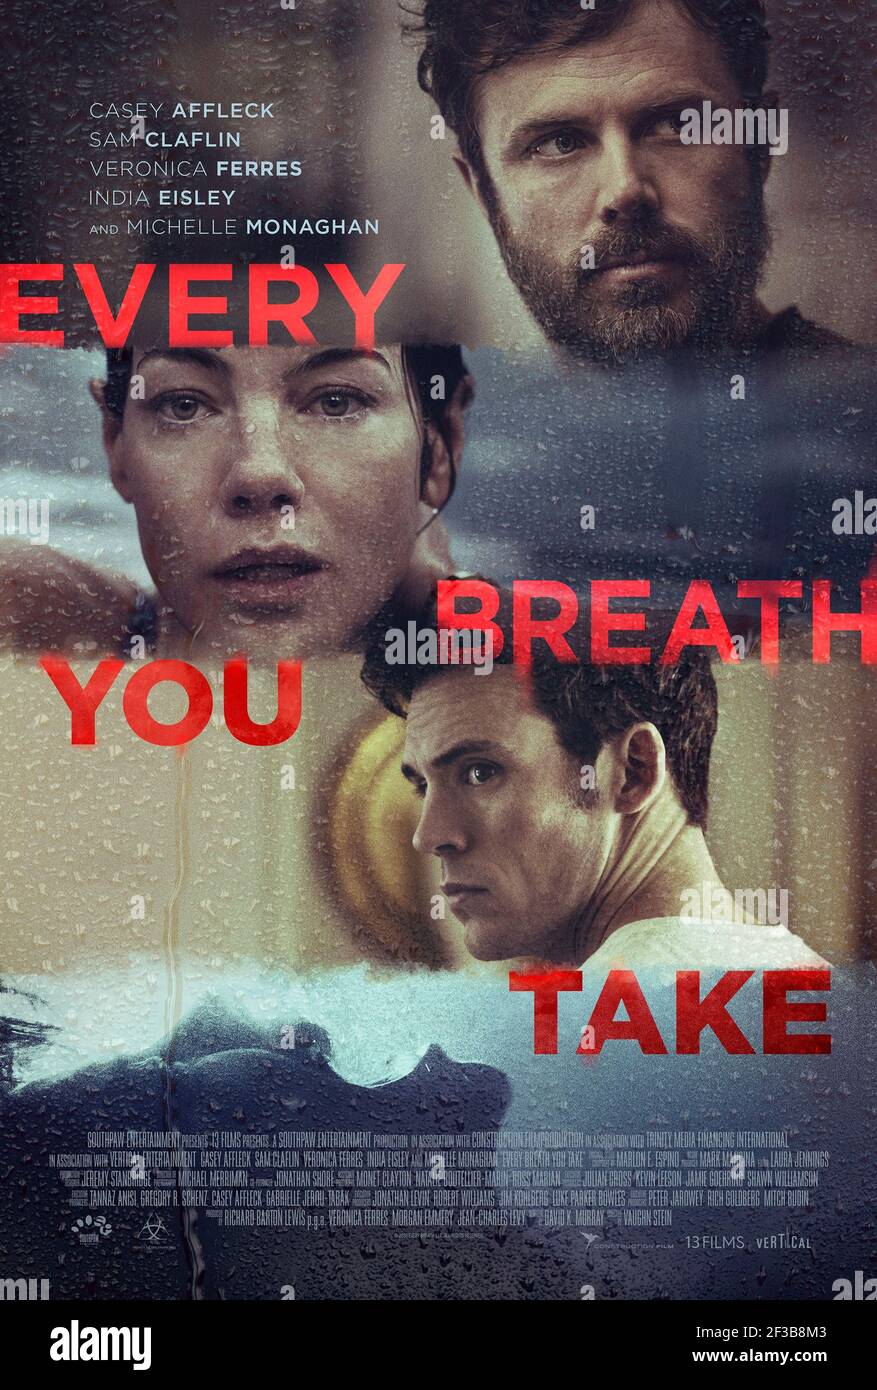 Every Breath You Take  (2021) directed by Vaughn Stein and starring Michelle Monaghan, Sam Claflin and Casey Affleck. A psychiatrist finds his family torn apart after a client commits suicide and he introduces her surviving brother to his wife and daughter. Stock Photo